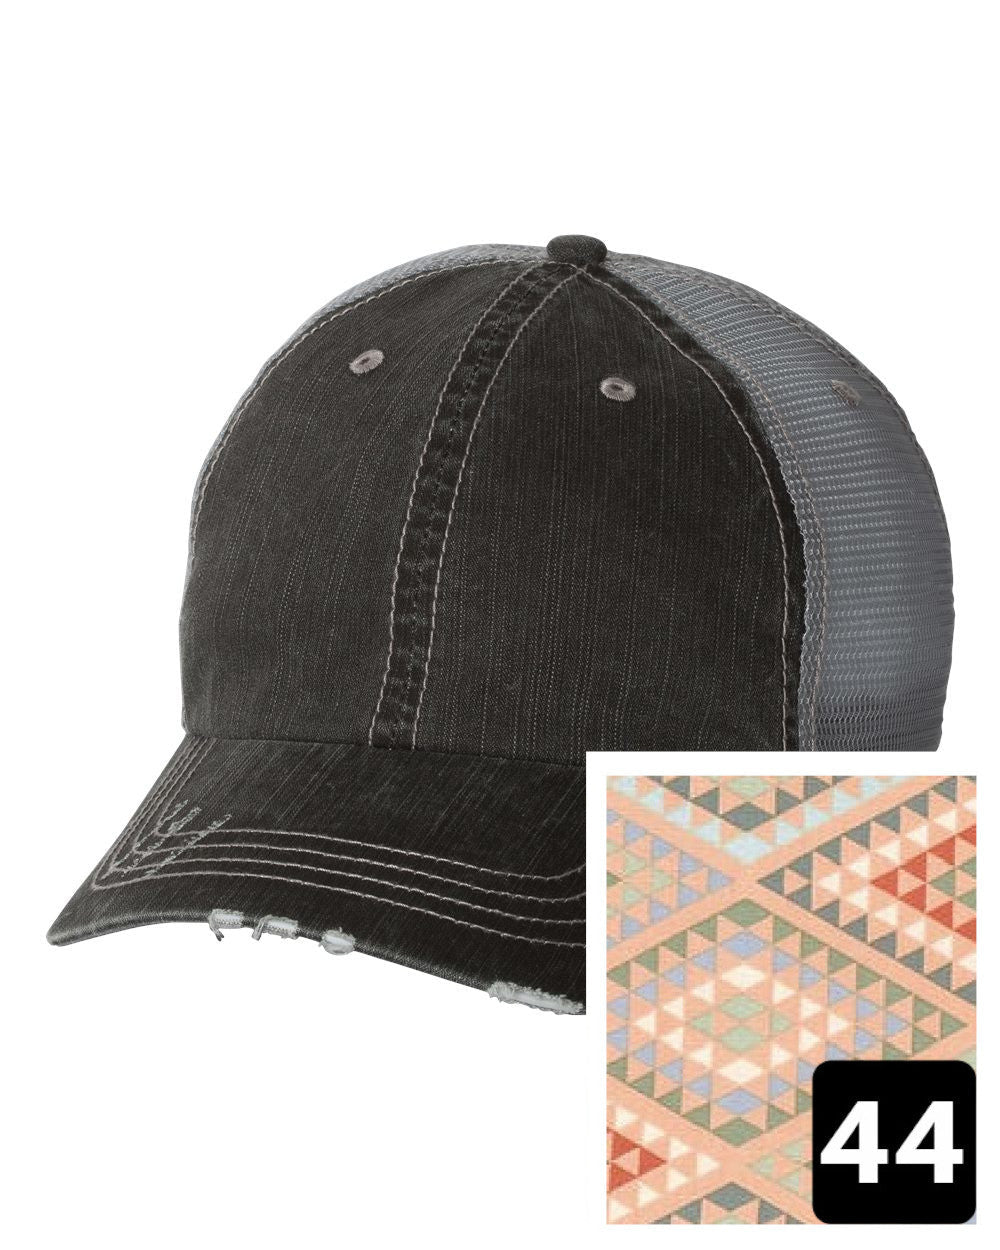 gray distressed trucker hat with navy coral and white chevron fabric state of Massachusetts